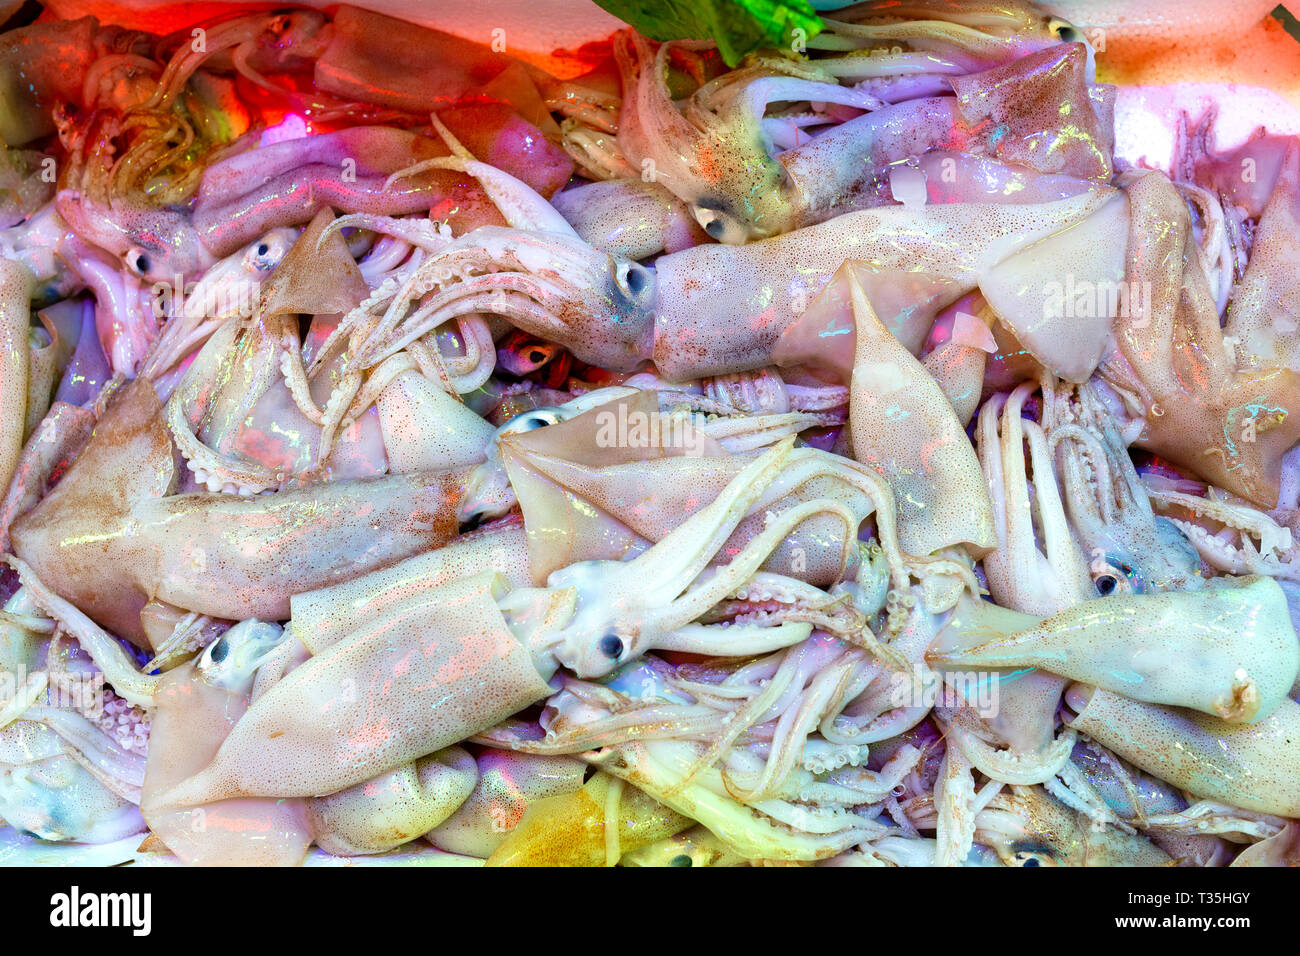 Closeup textured view of squids on the market. Squid Tubes are known by the popular Italian name Calamari. Stock Photo